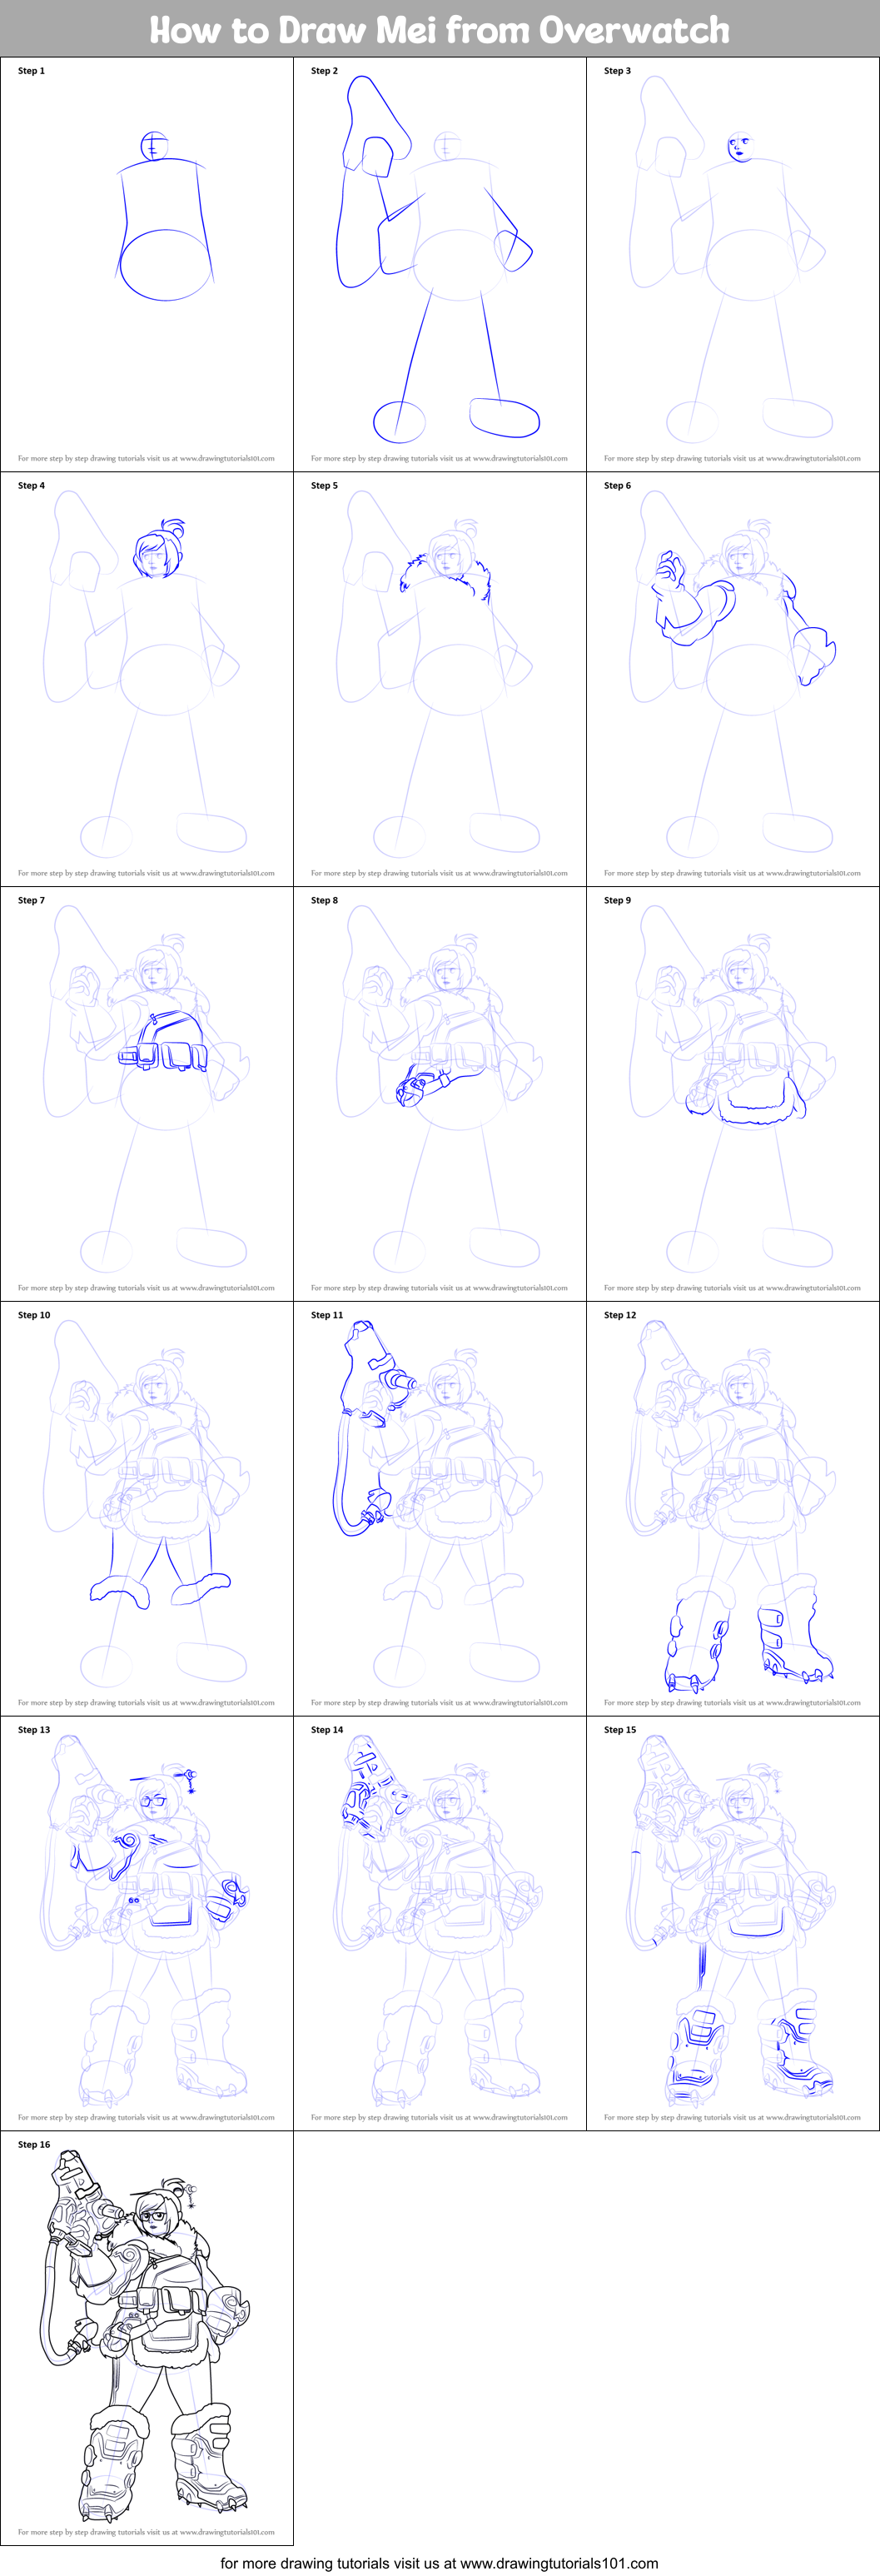 How to Draw Mei from Overwatch (Overwatch) Step by Step ...